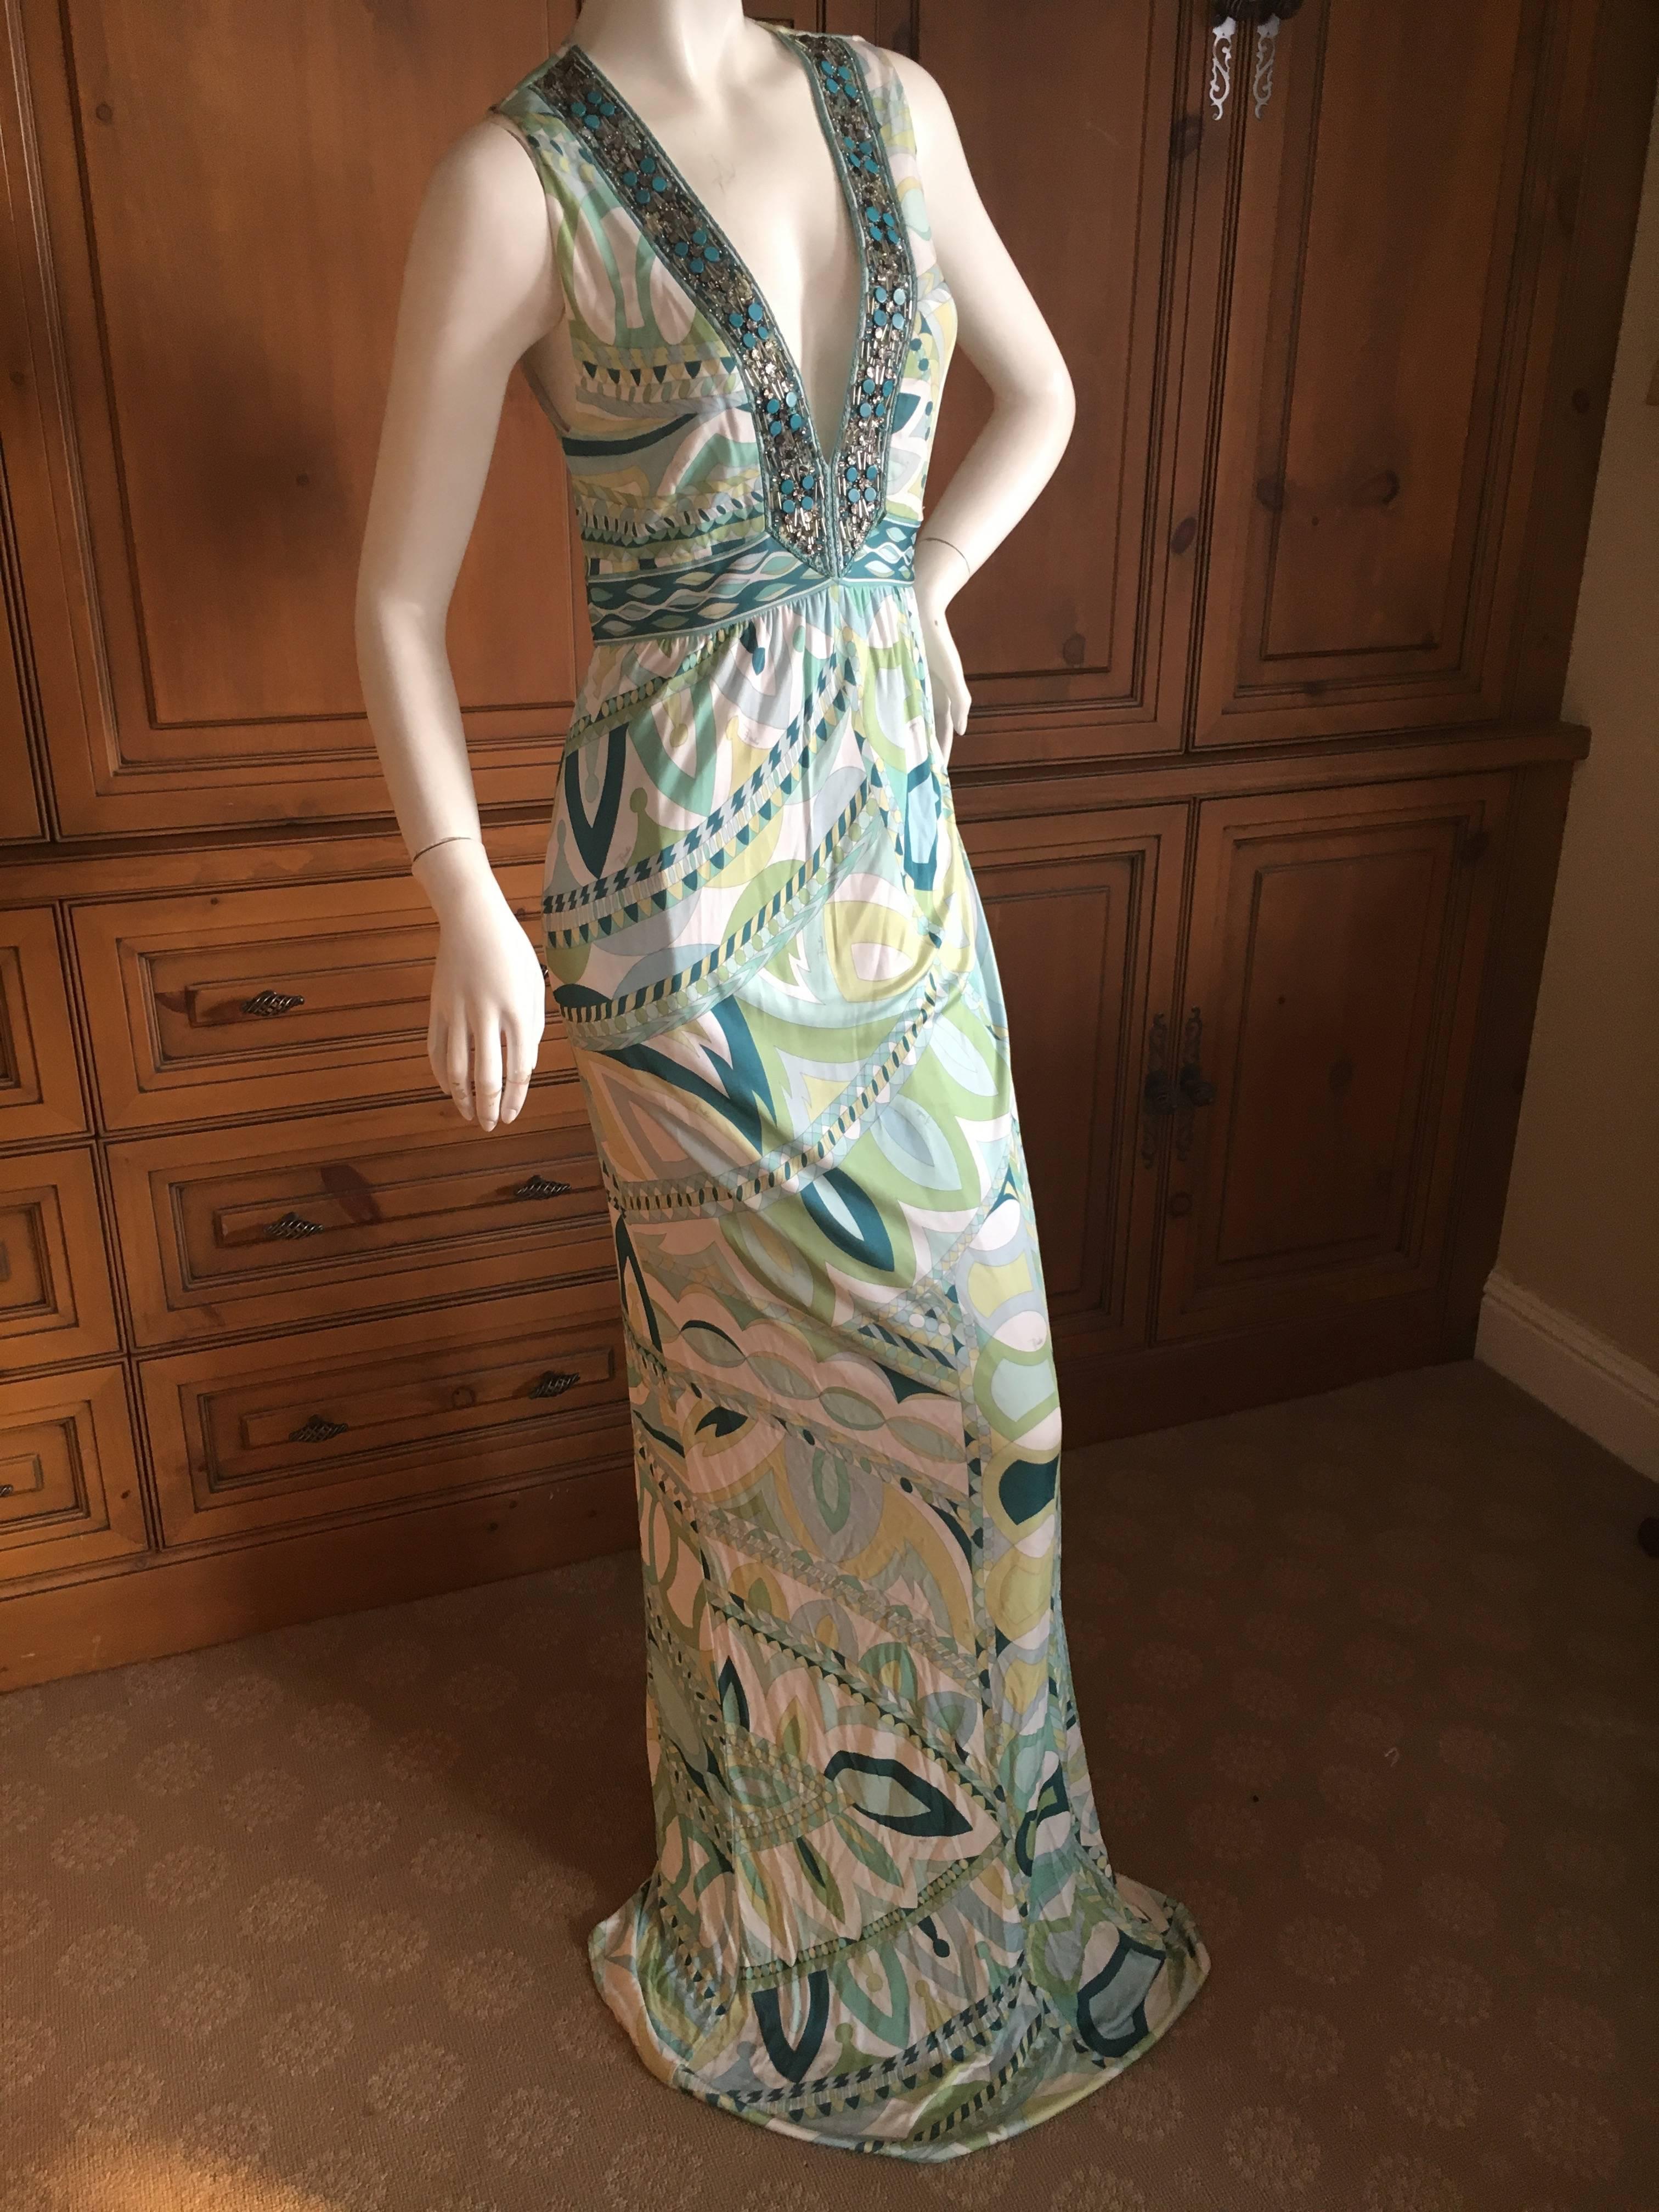 Women's Emilio Pucci Bead Embellished Maxi Dress New with Tags